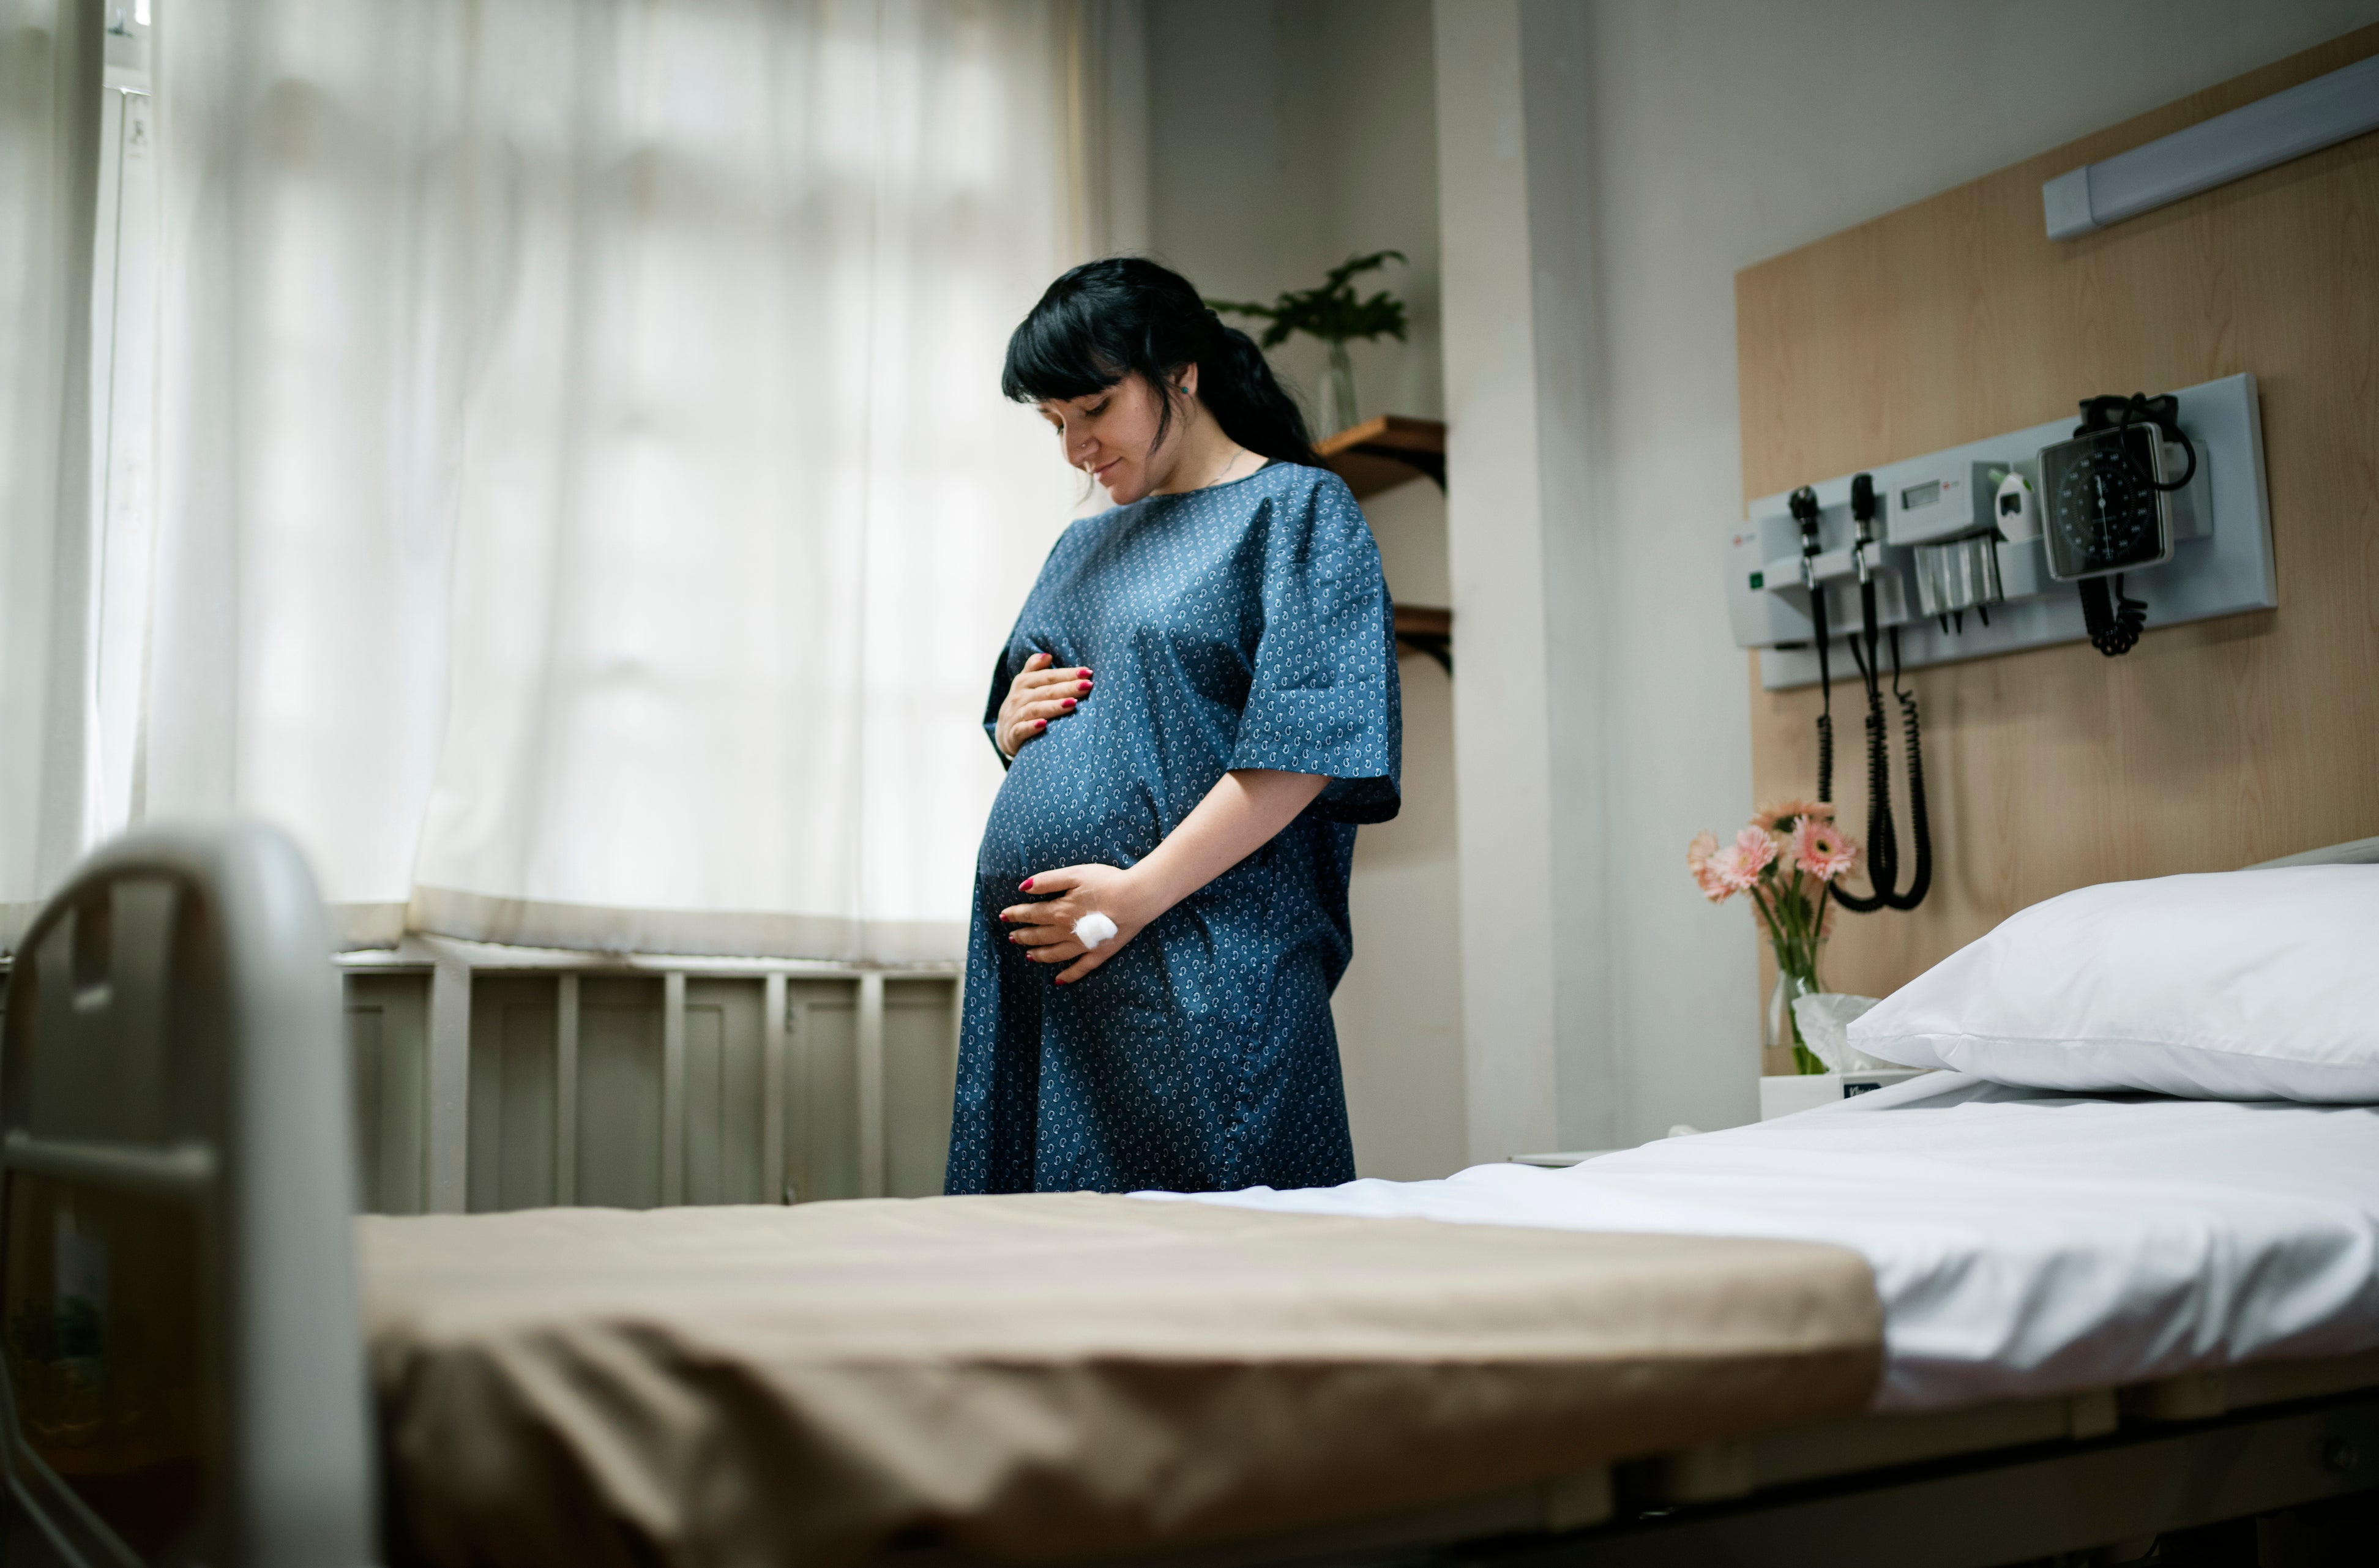 For too long, maternity has been allowed to operate as if it is exempt from the standards imposed in other areas of patient care